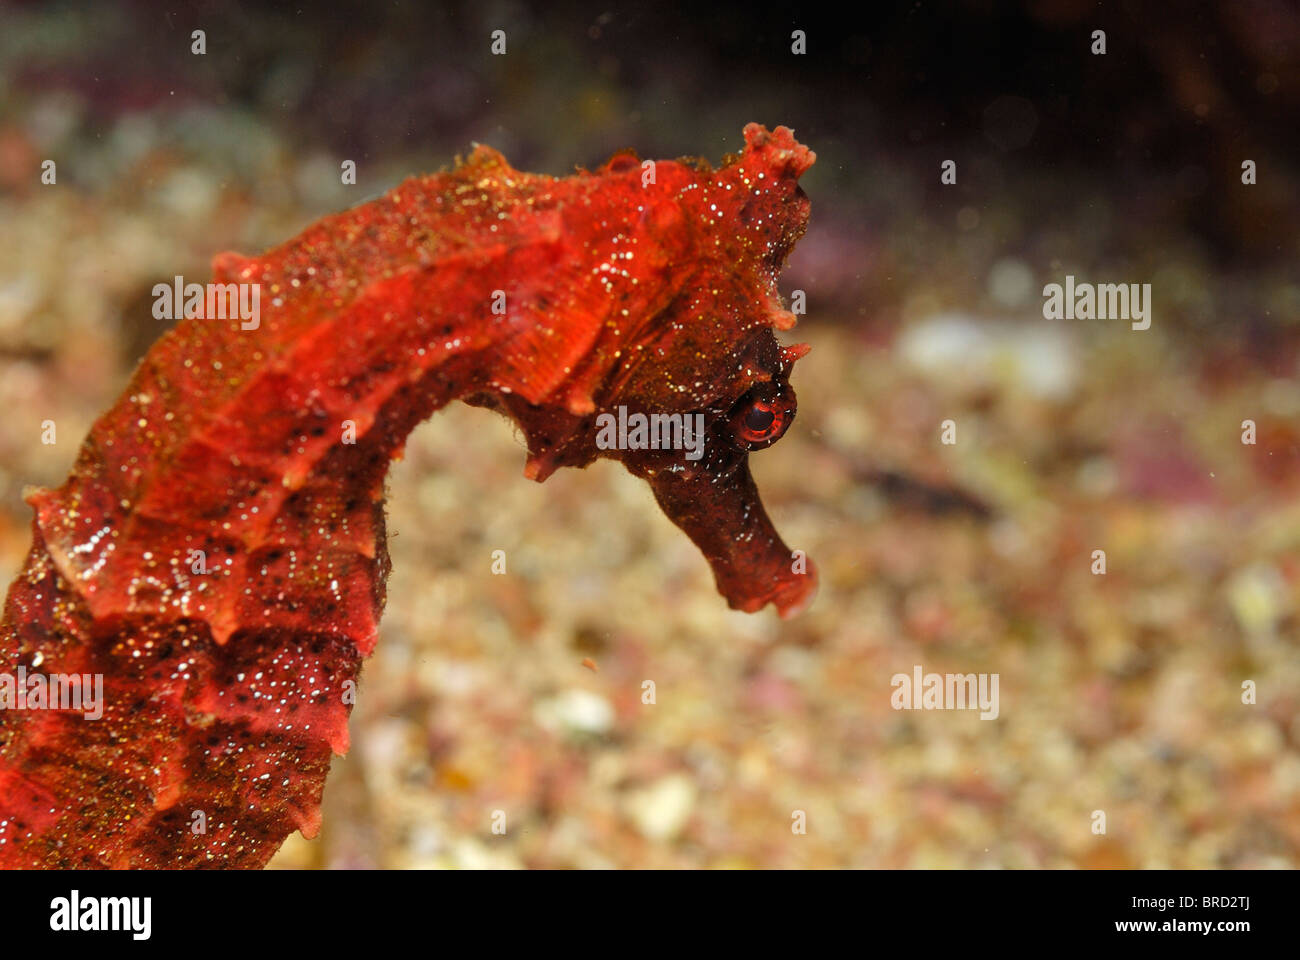 Close up of Red Pacific seahorse (Hippocampus ingens), underwater view, off the Galapagos Islands Archipelago, Ecuador Stock Photo